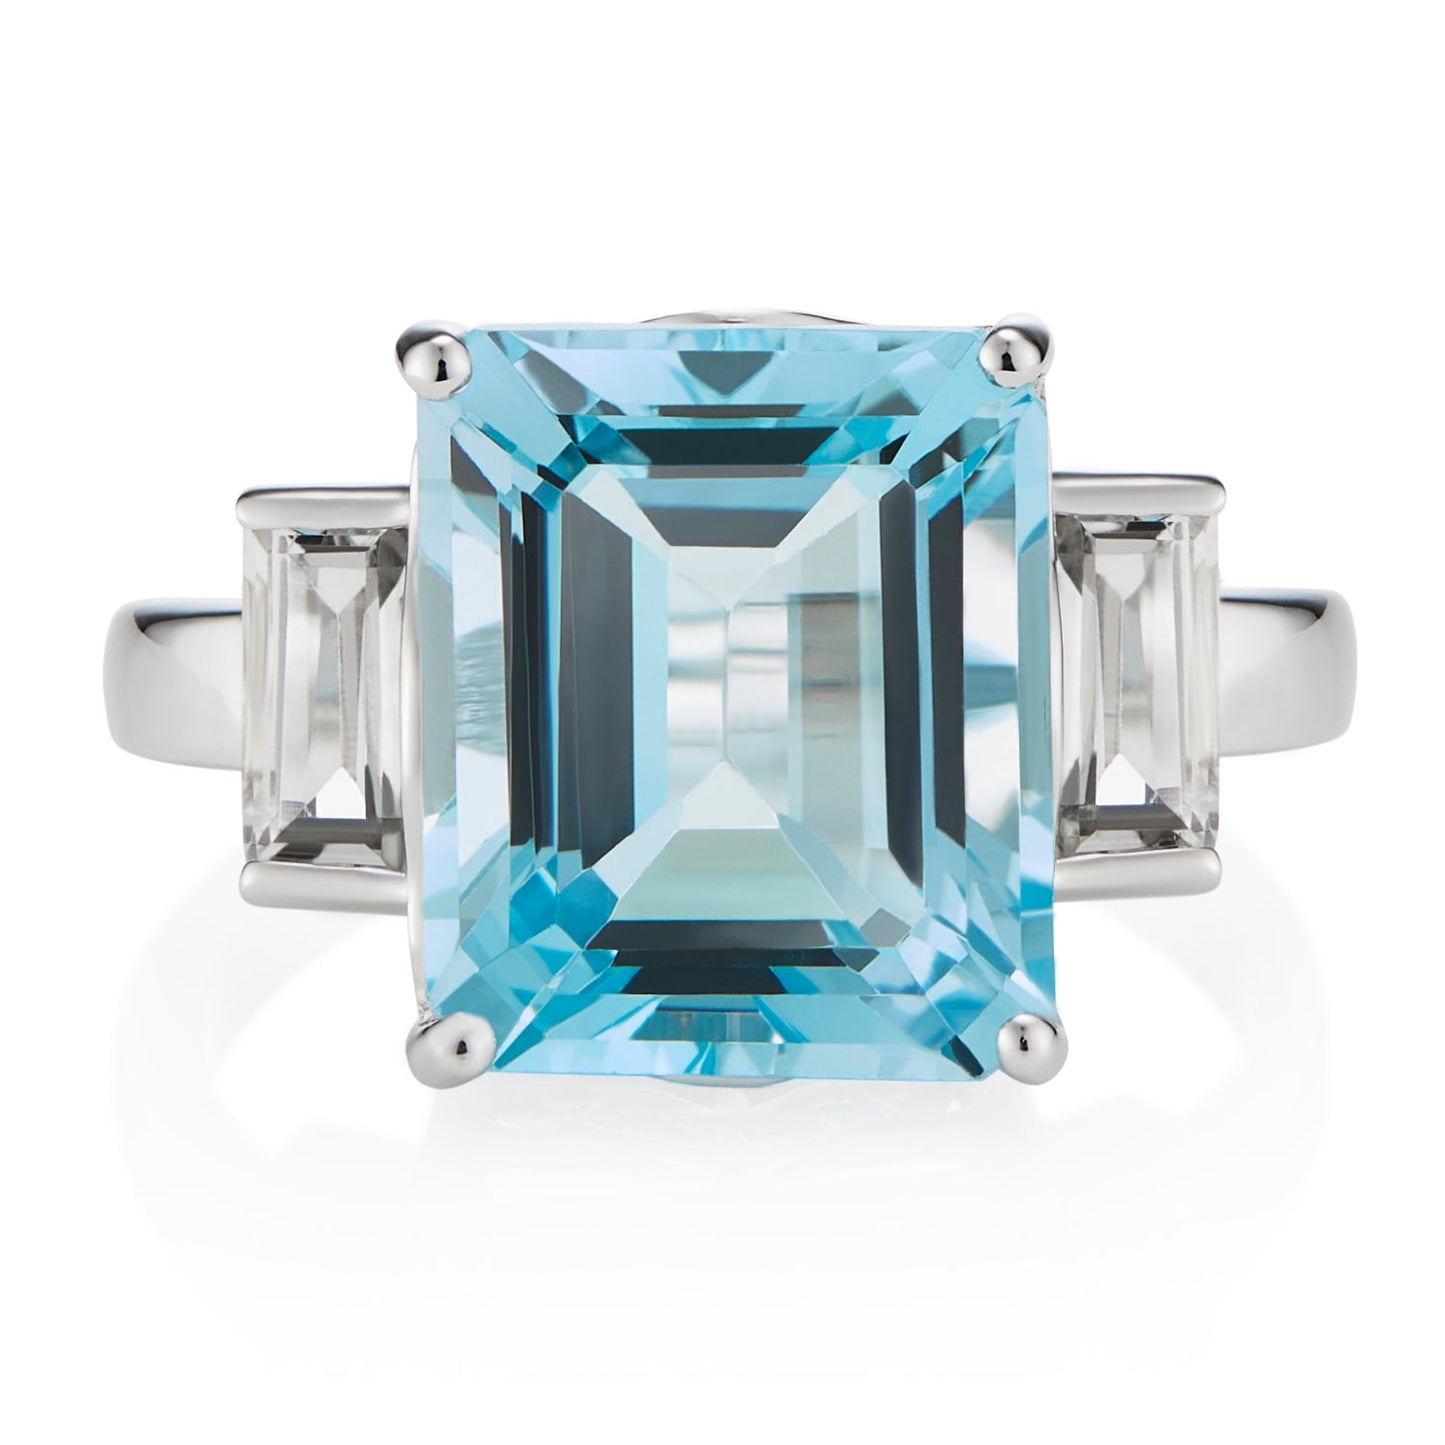 London-made luxury custom gold gemstone jewellery -Octagon White Gold Ring in White Topaz and Blue Topaz – Andalusian Collection, Augustine Jewellery, British Jewellers, Gemstone Jewellery, Luxury Jewellery London.